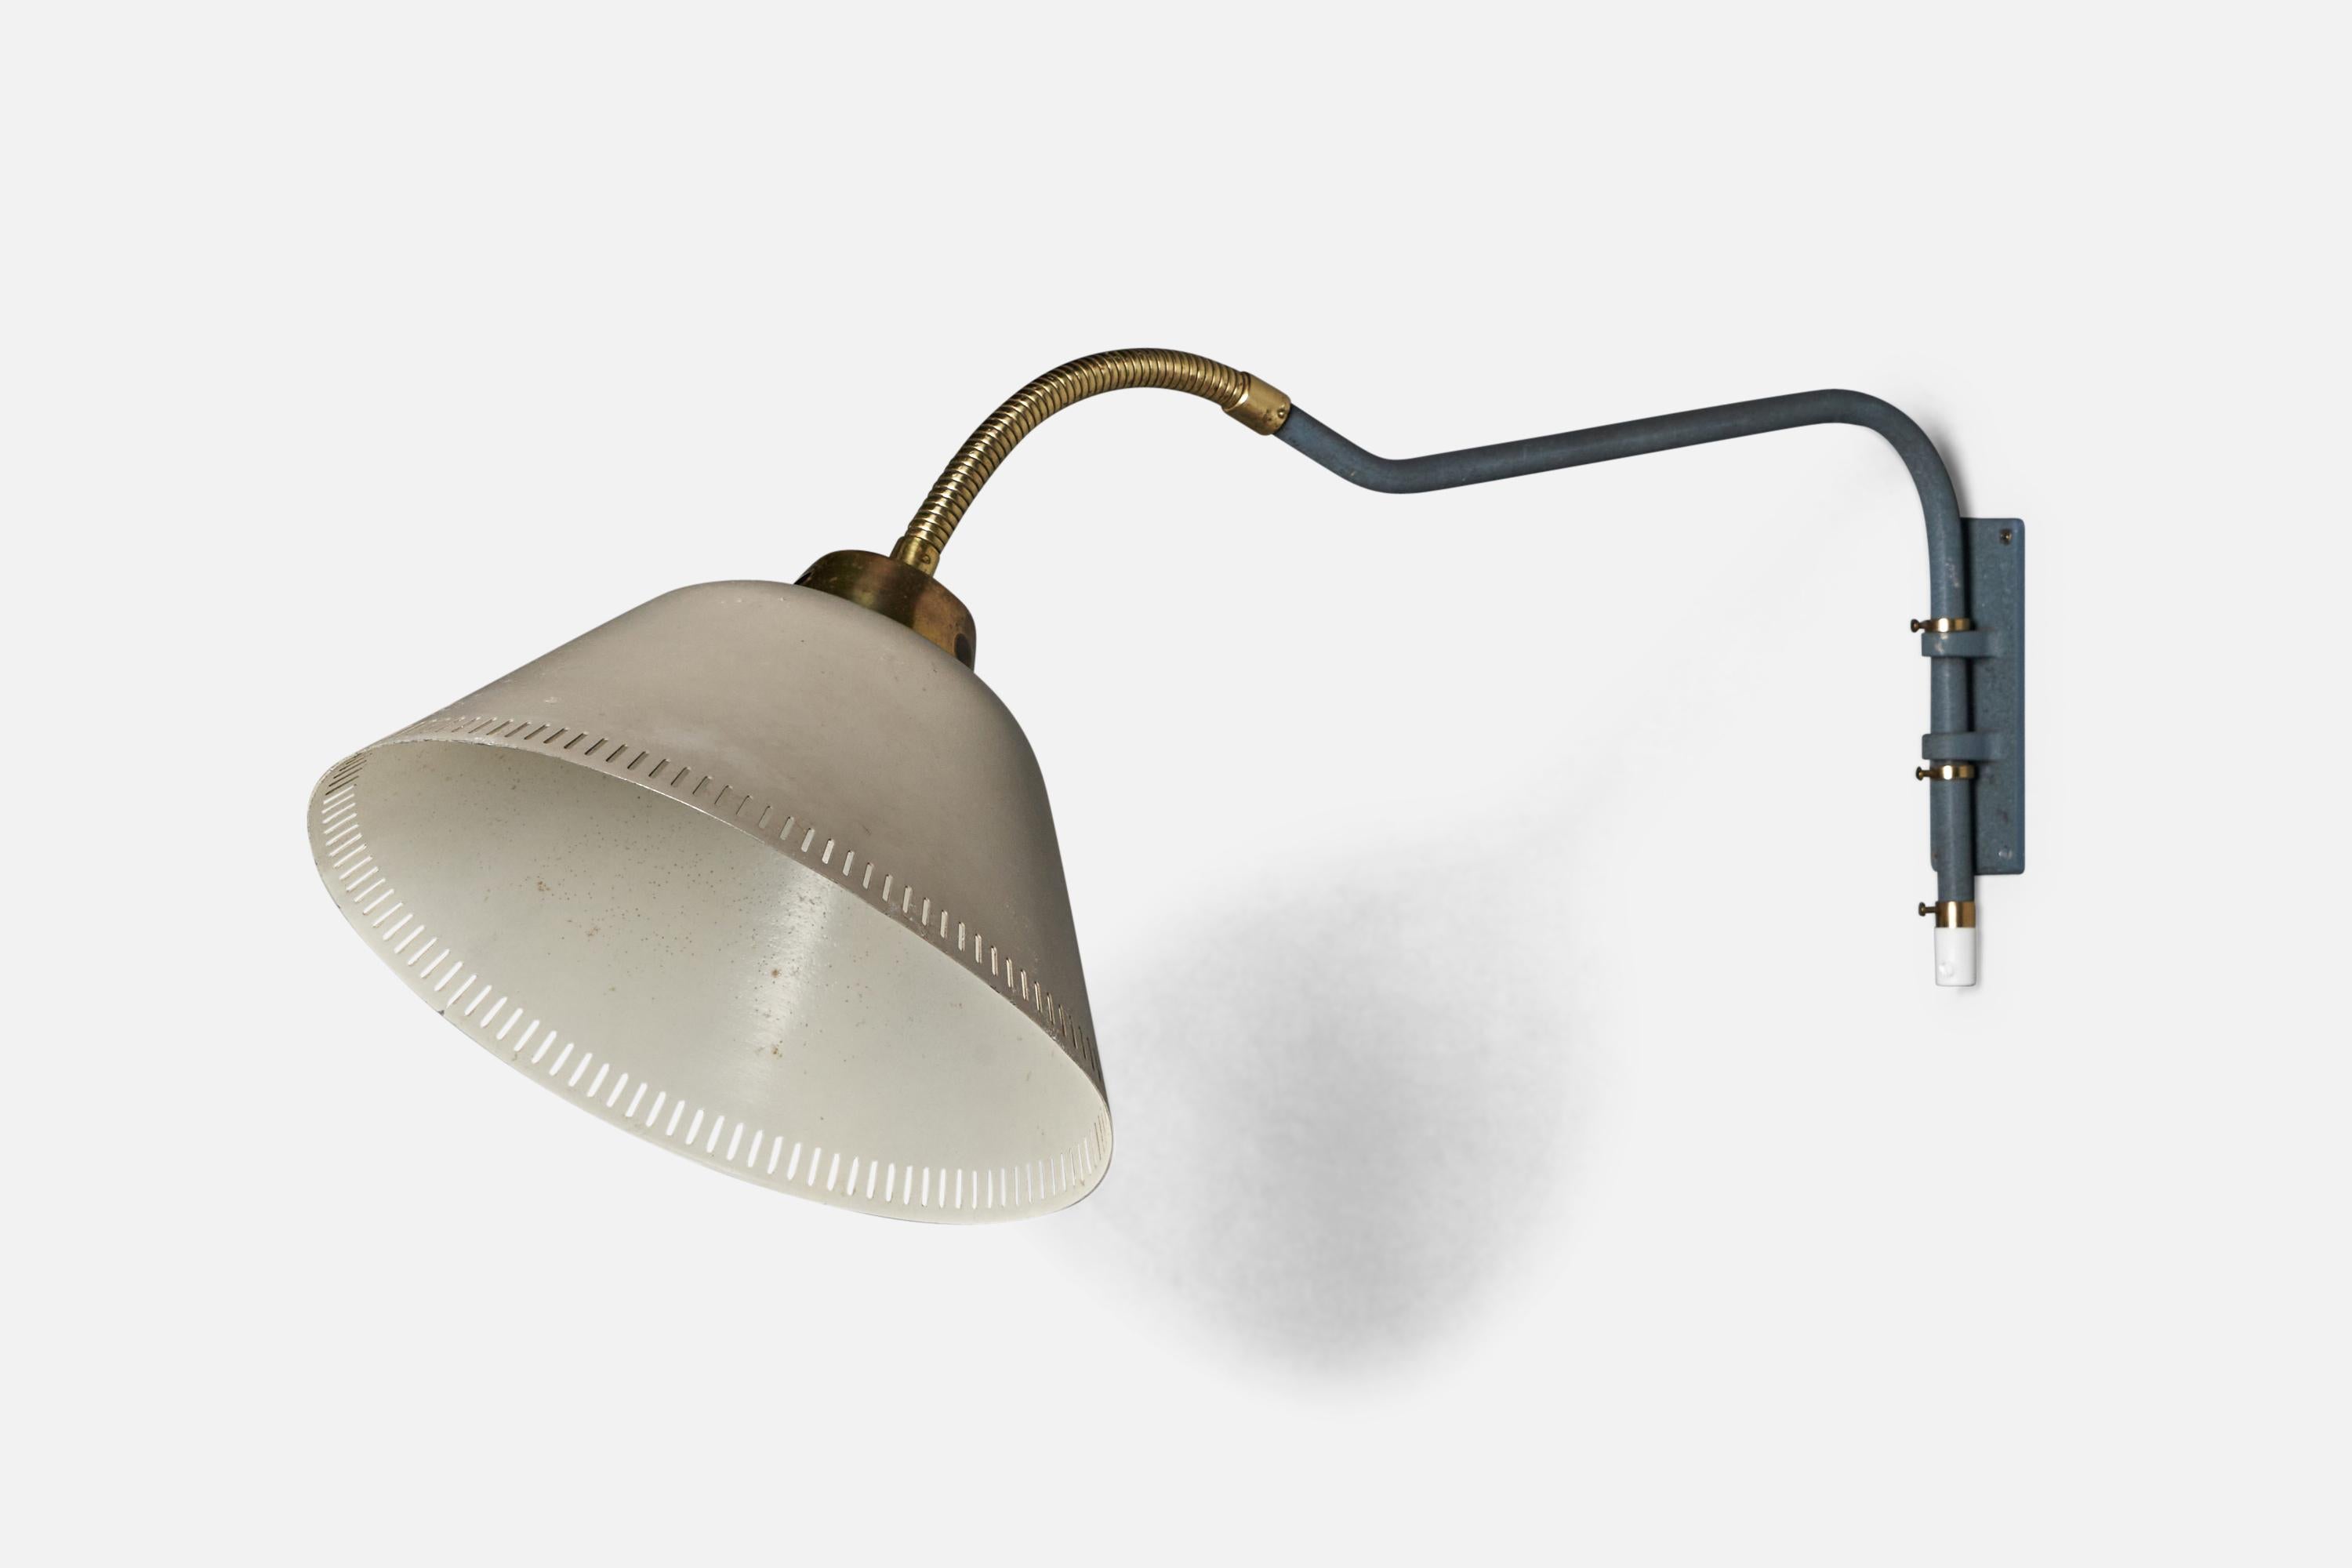 A brass and blue grey lacquered metal wall light designed and produced in Sweden, 1940s.

Overall Dimensions (inches): 11” H x 10.6” W x 30” D
Back Plate Dimensions (inches): 5.25” H x 1.9” W x 0.1” D
Bulb Specifications: E-26 Bulb
Number of